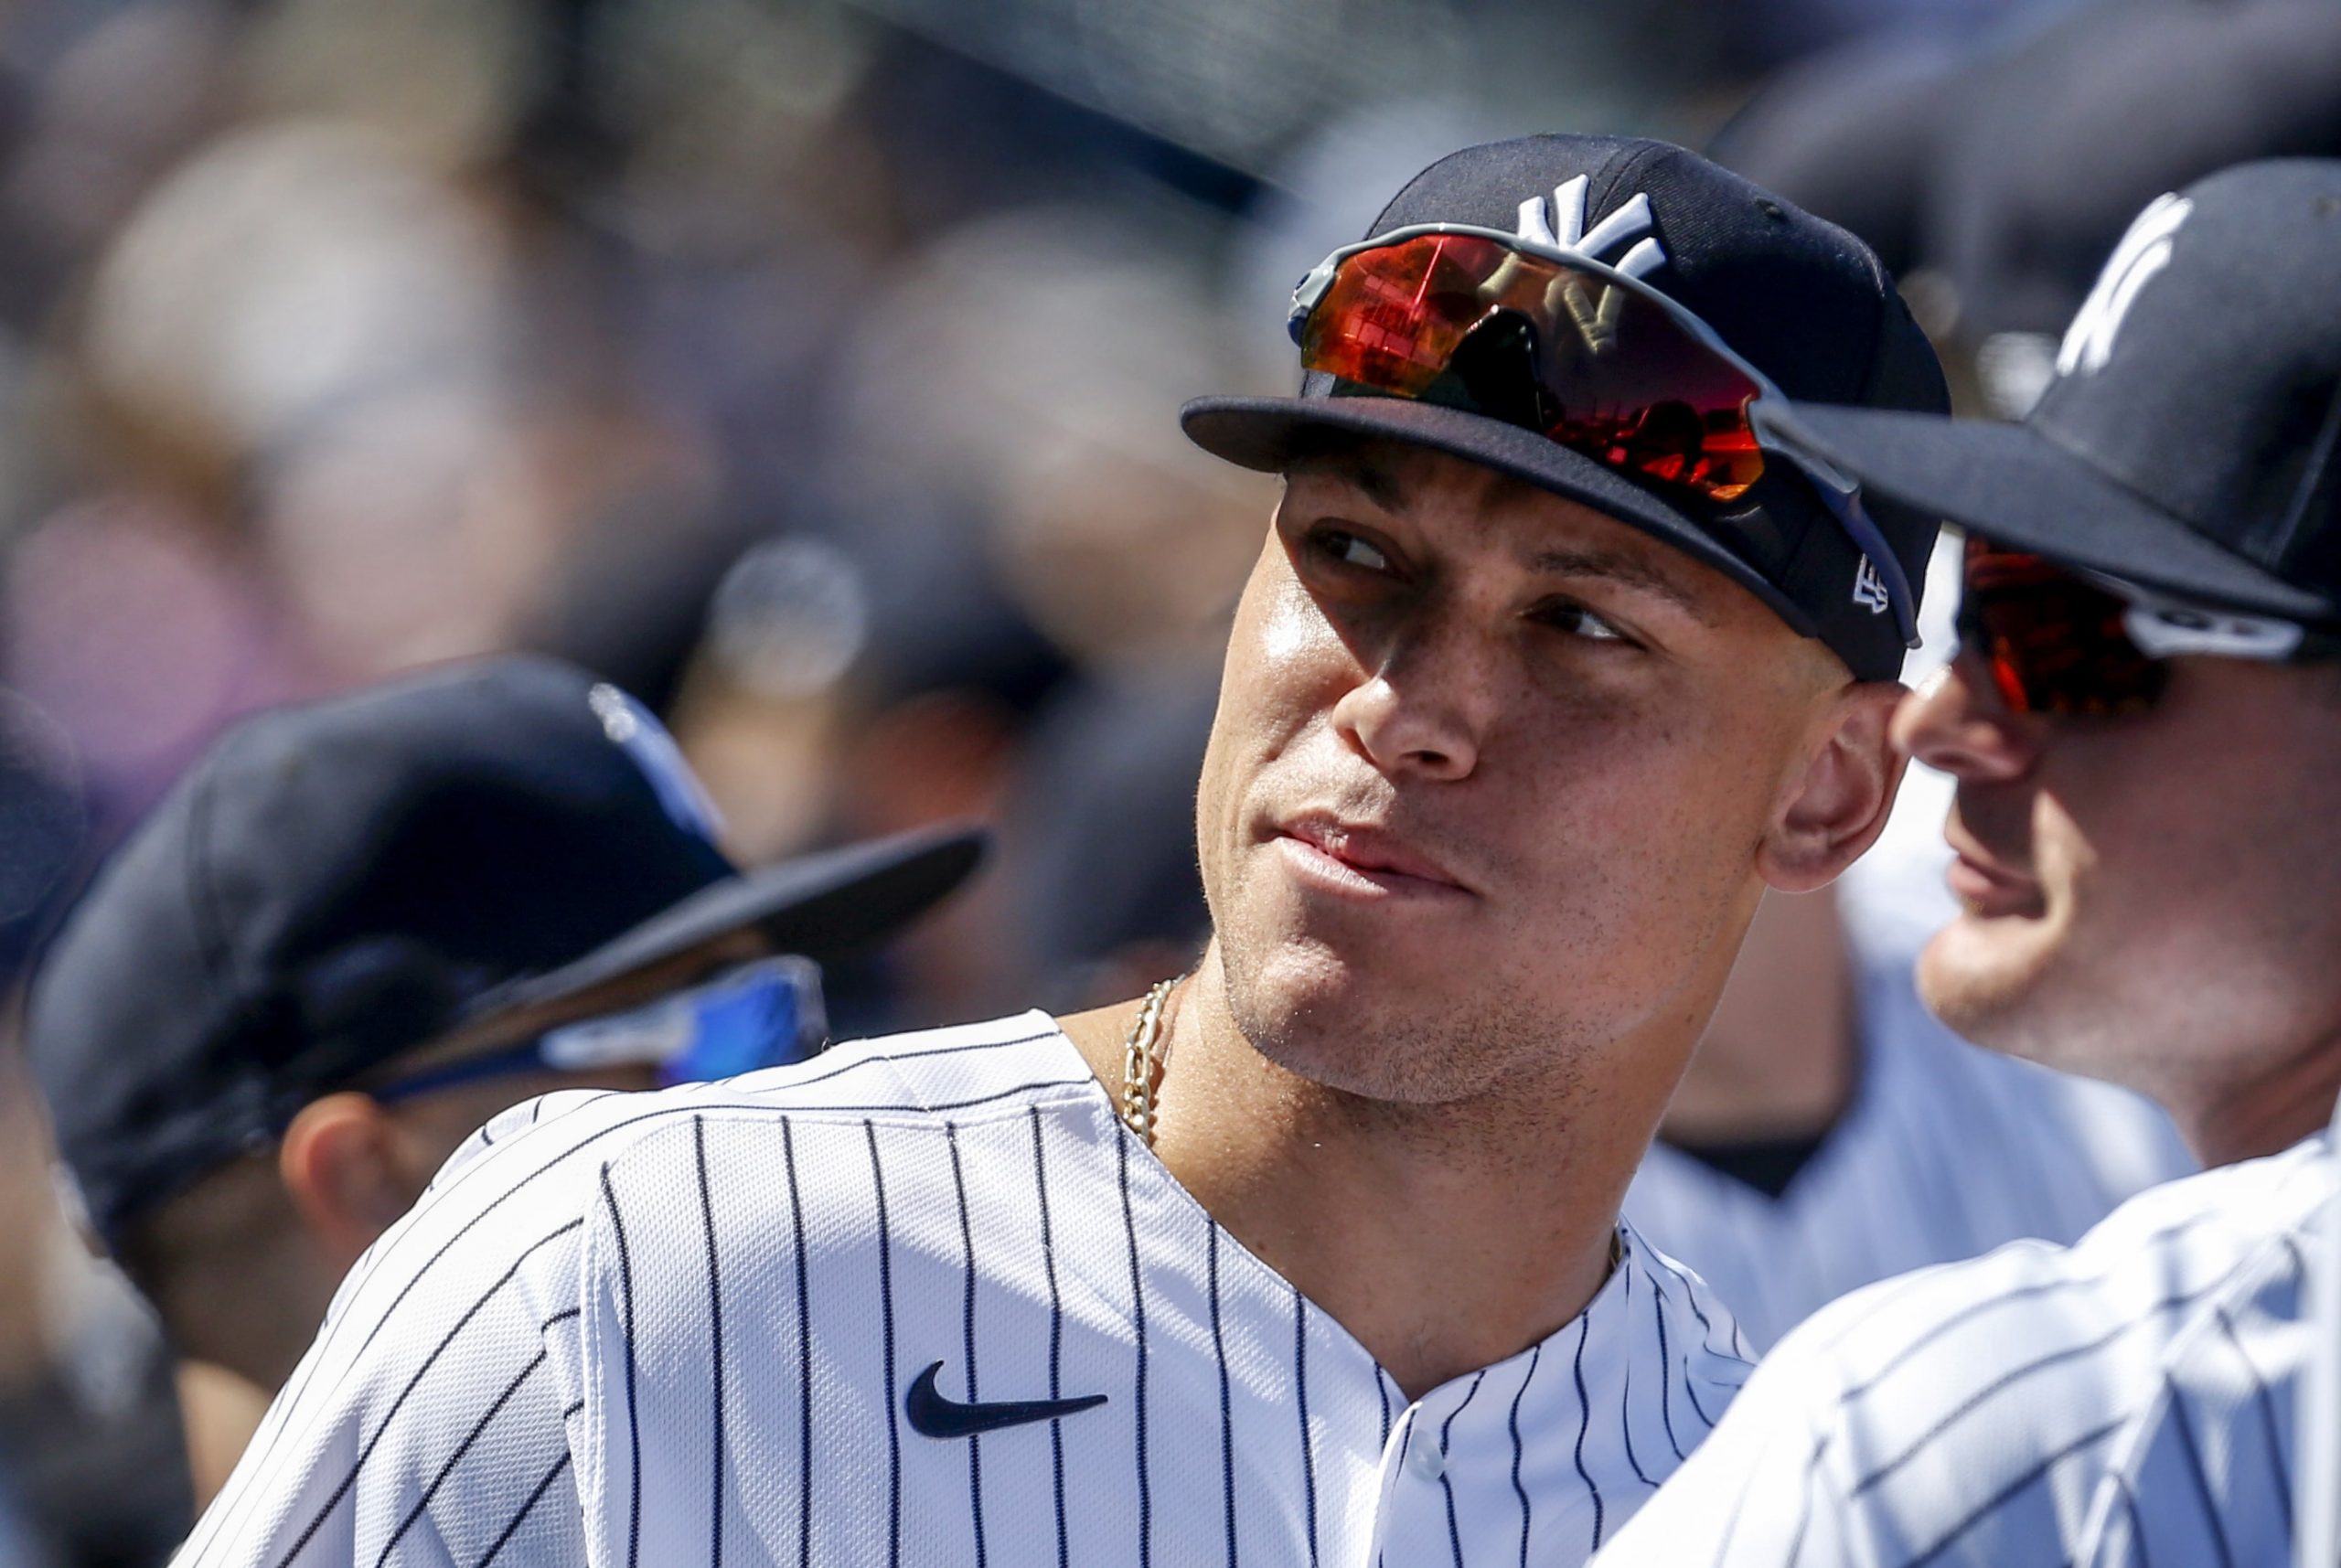 Aaron Judge of the New York Yankees hangs out in the dugout.